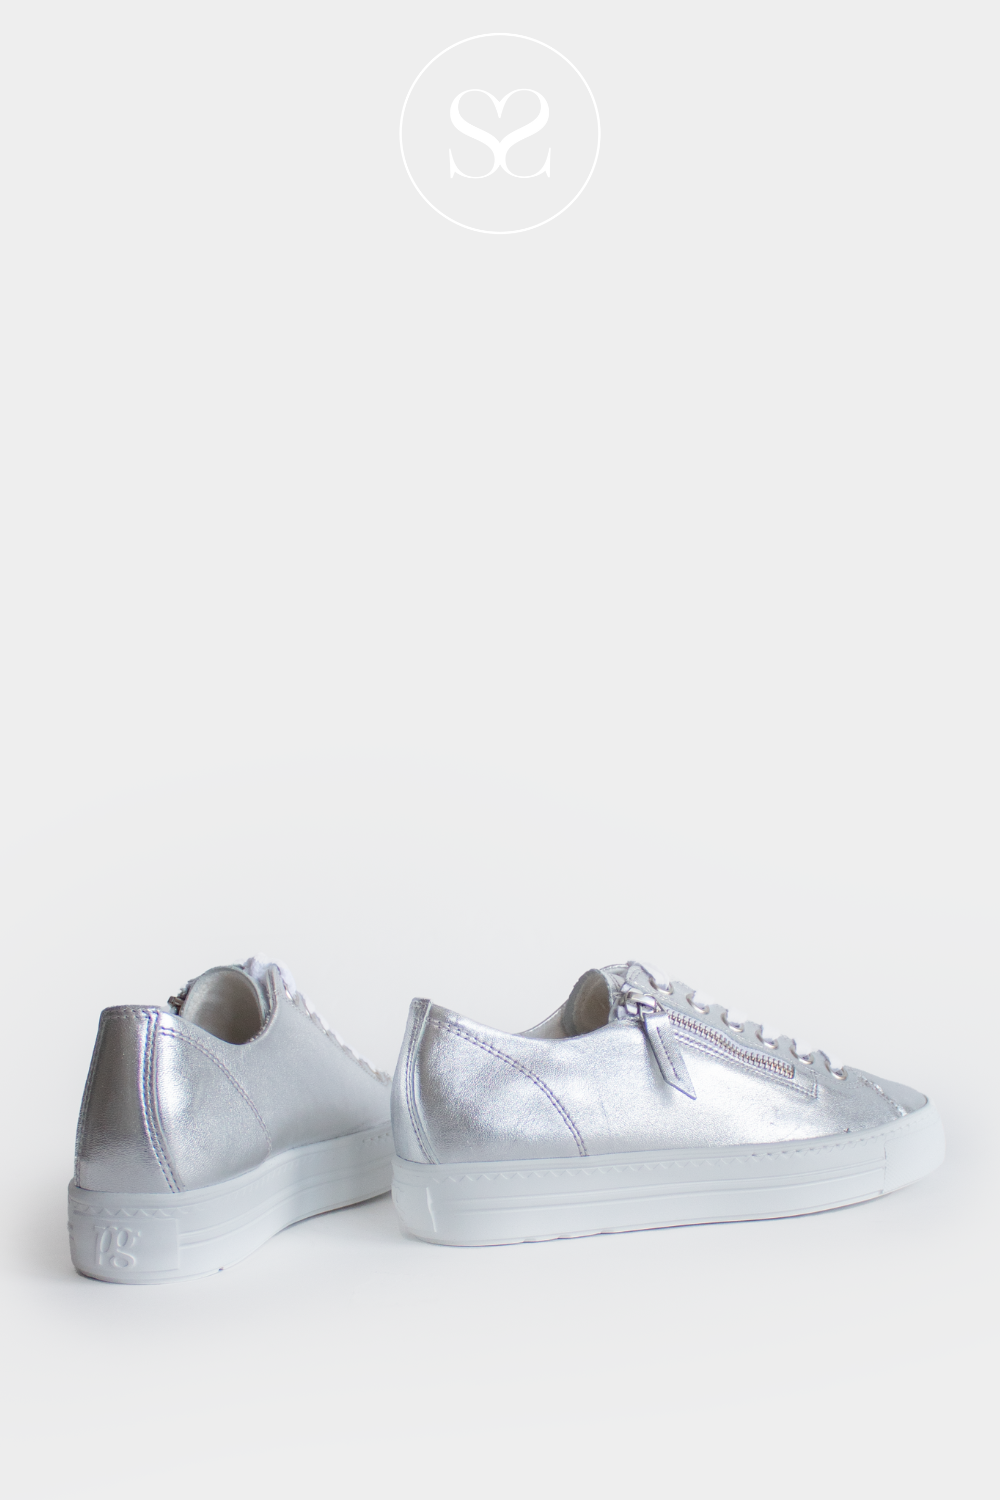 PAUL GREEN 5206 SILVER LEATHER FLATFORM TRAINERS